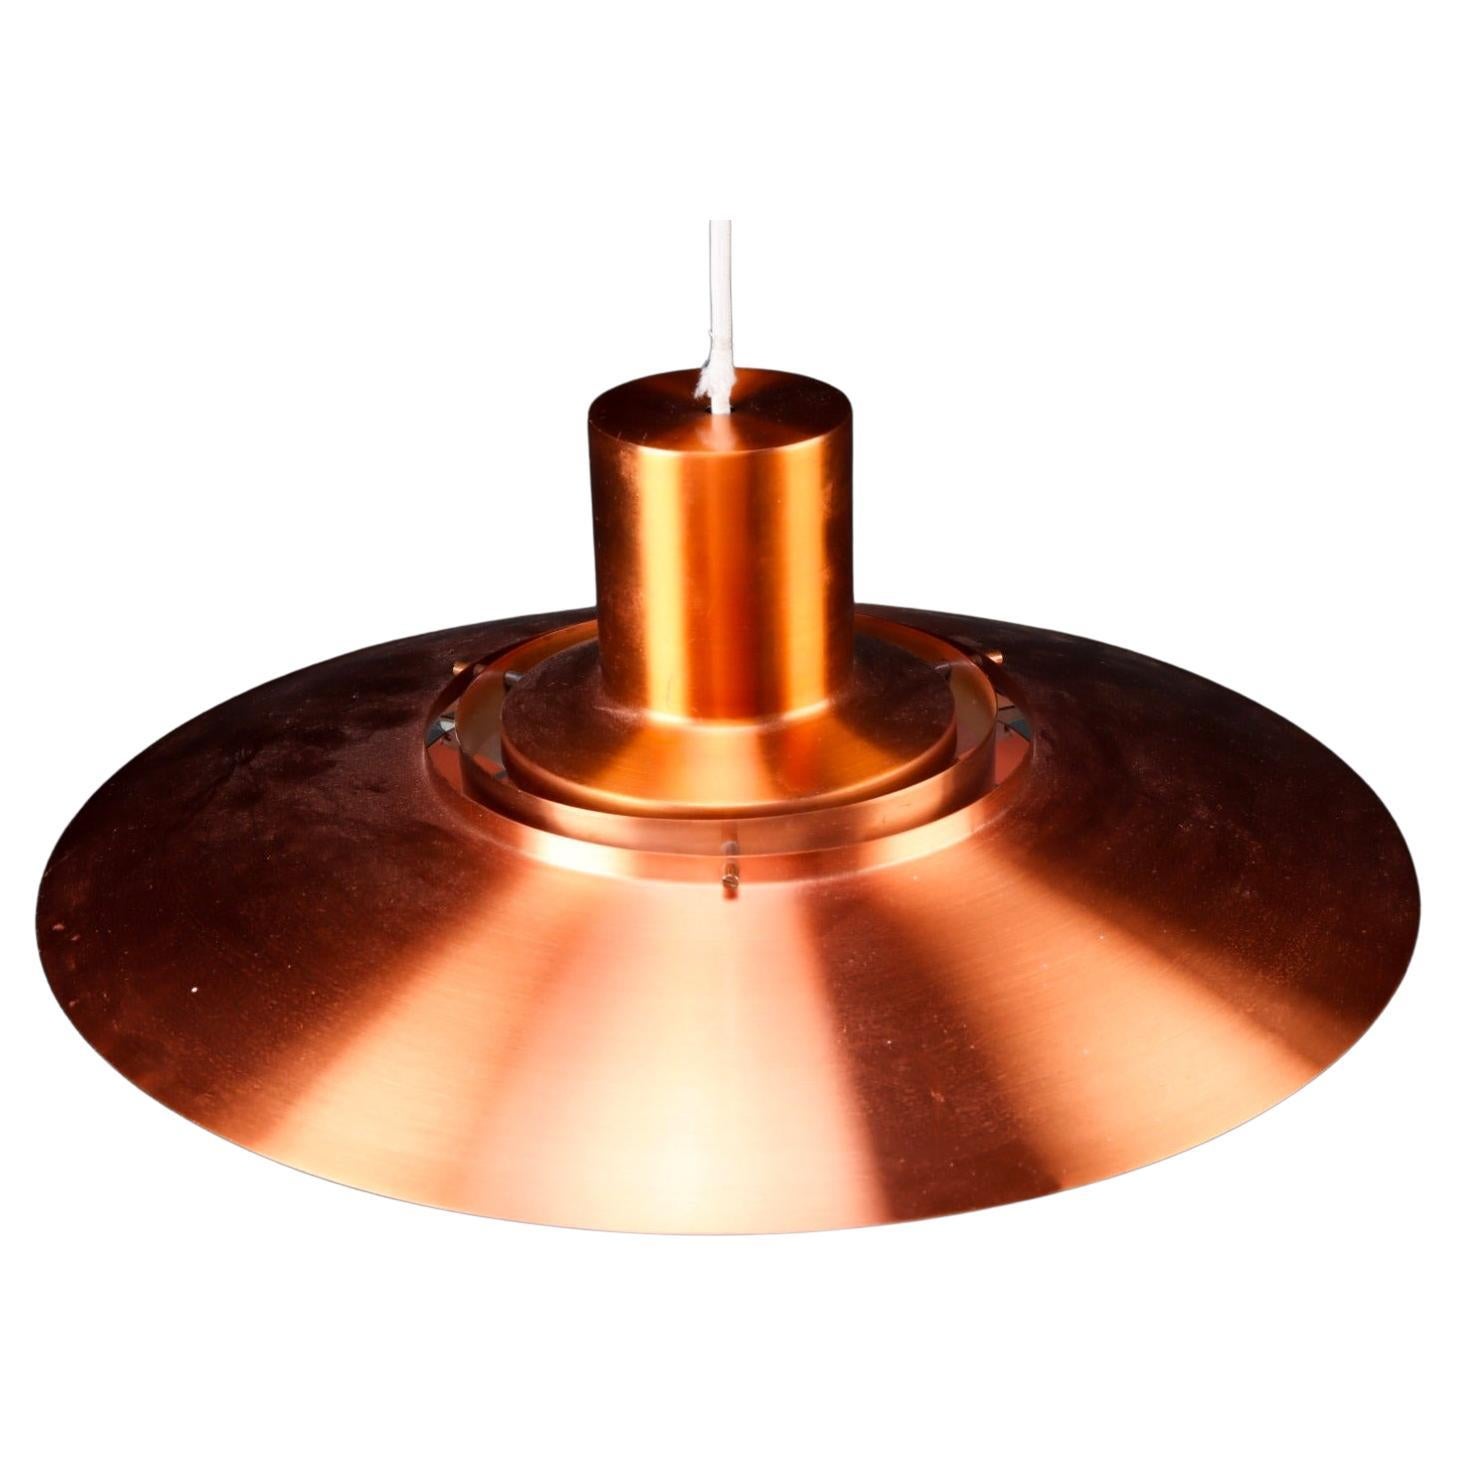 Scandinavian Modern pendant in copper designed by Preben Fabricius & Jørgen Kastholm. Model 376, designed for and produced by Nordisk Solar in Denmark 1963. This classic Danish Design lamp will complement many interior styles. A modern, antique,